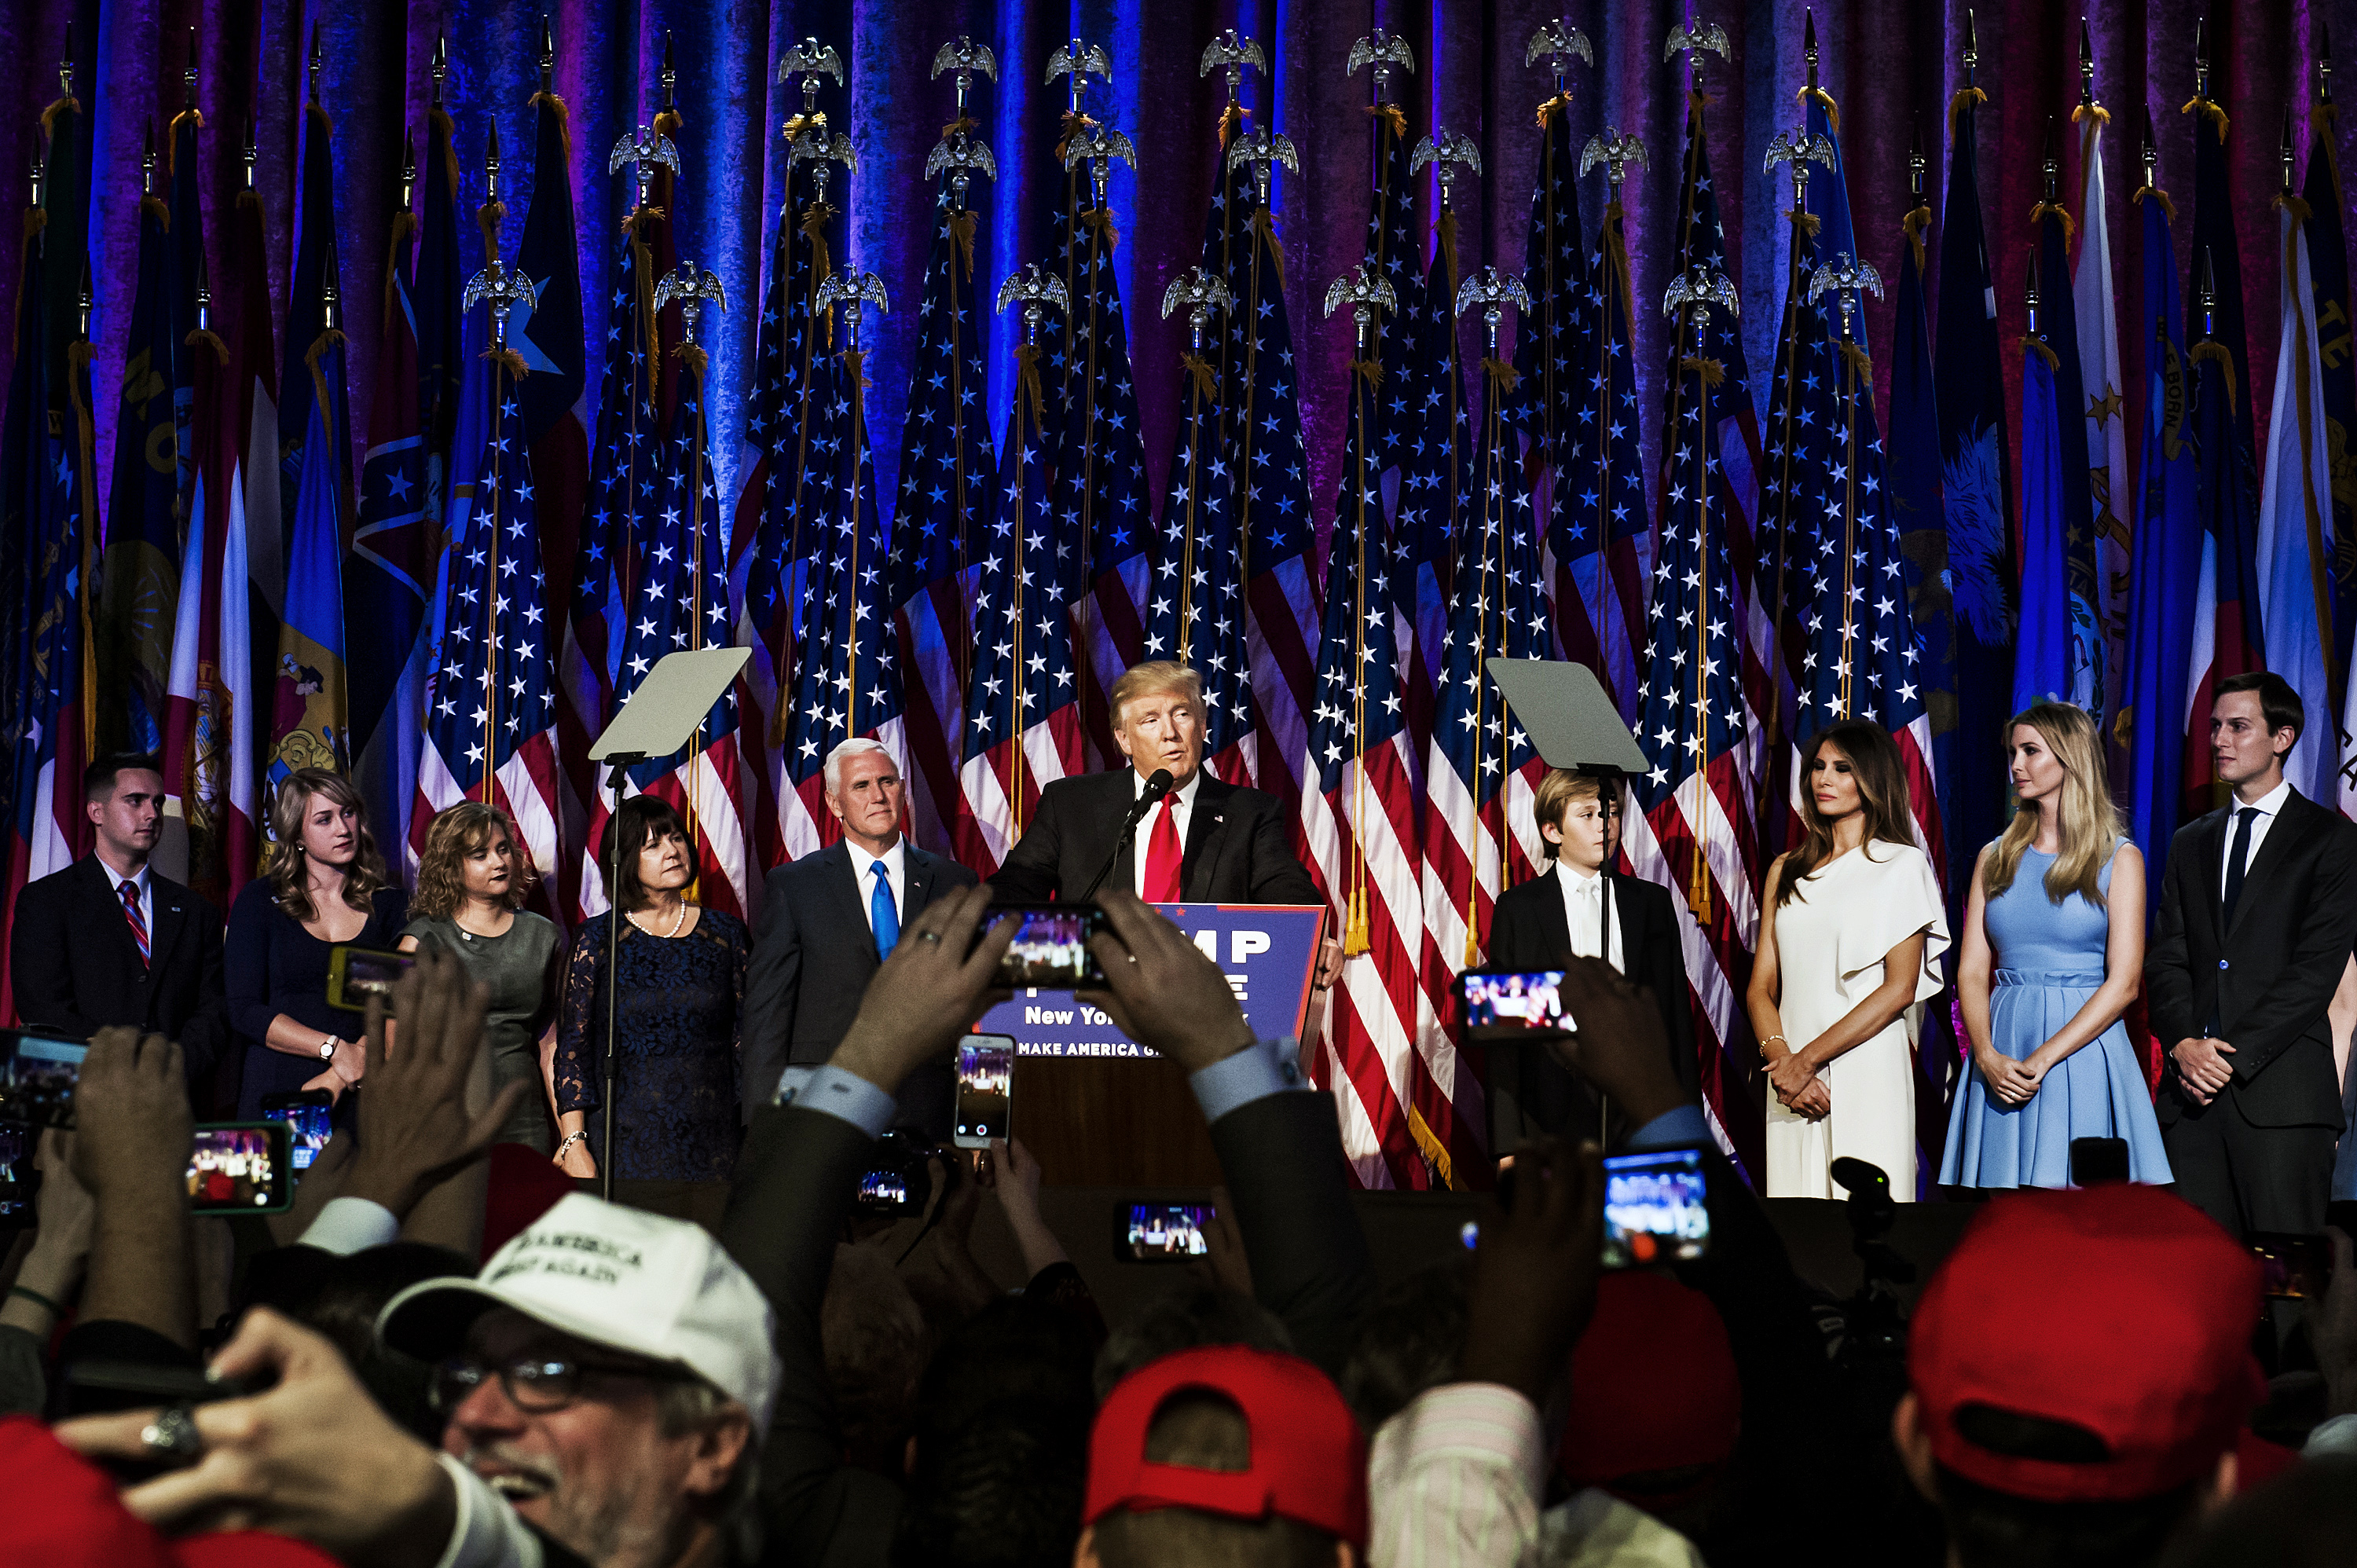 President-elect Donald Trump addresses his Victory Night party on Tuesday, Nov. 8, 2016 in New York's Manhattan borough. Trump defeated Democratic nominee Hillary Clinton in the contest for president of the United States.President-elect Donald Trump addresses his Victory Night party on Tuesday, Nov. 8, 2016 in New York's Manhattan borough. Trump defeated Democratic nominee Hillary Clinton in the contest for president of the United States. (Dina Litovsky for TIME)